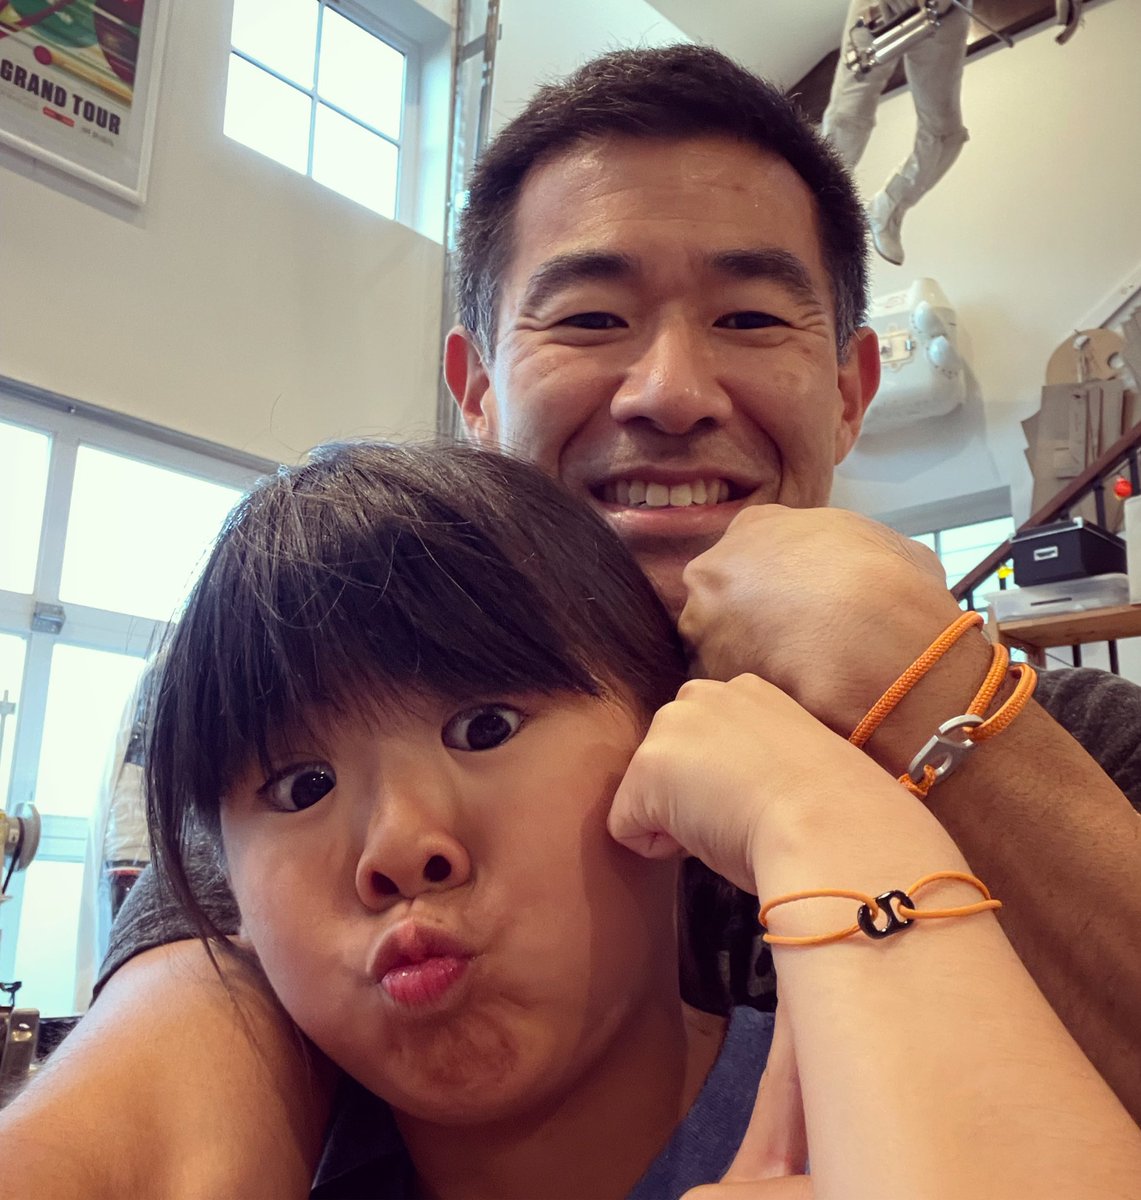 Proud to wear my #togetherband in support of STEAM access for our future generation of innovators (like Penny). Proceeds go to the We Build it Better and @spacefabworld foundations. @thetogetherband @Bottletoppers @TheGlobalGoals @UNFoundationGEC @Airbus #discoverthecosmos